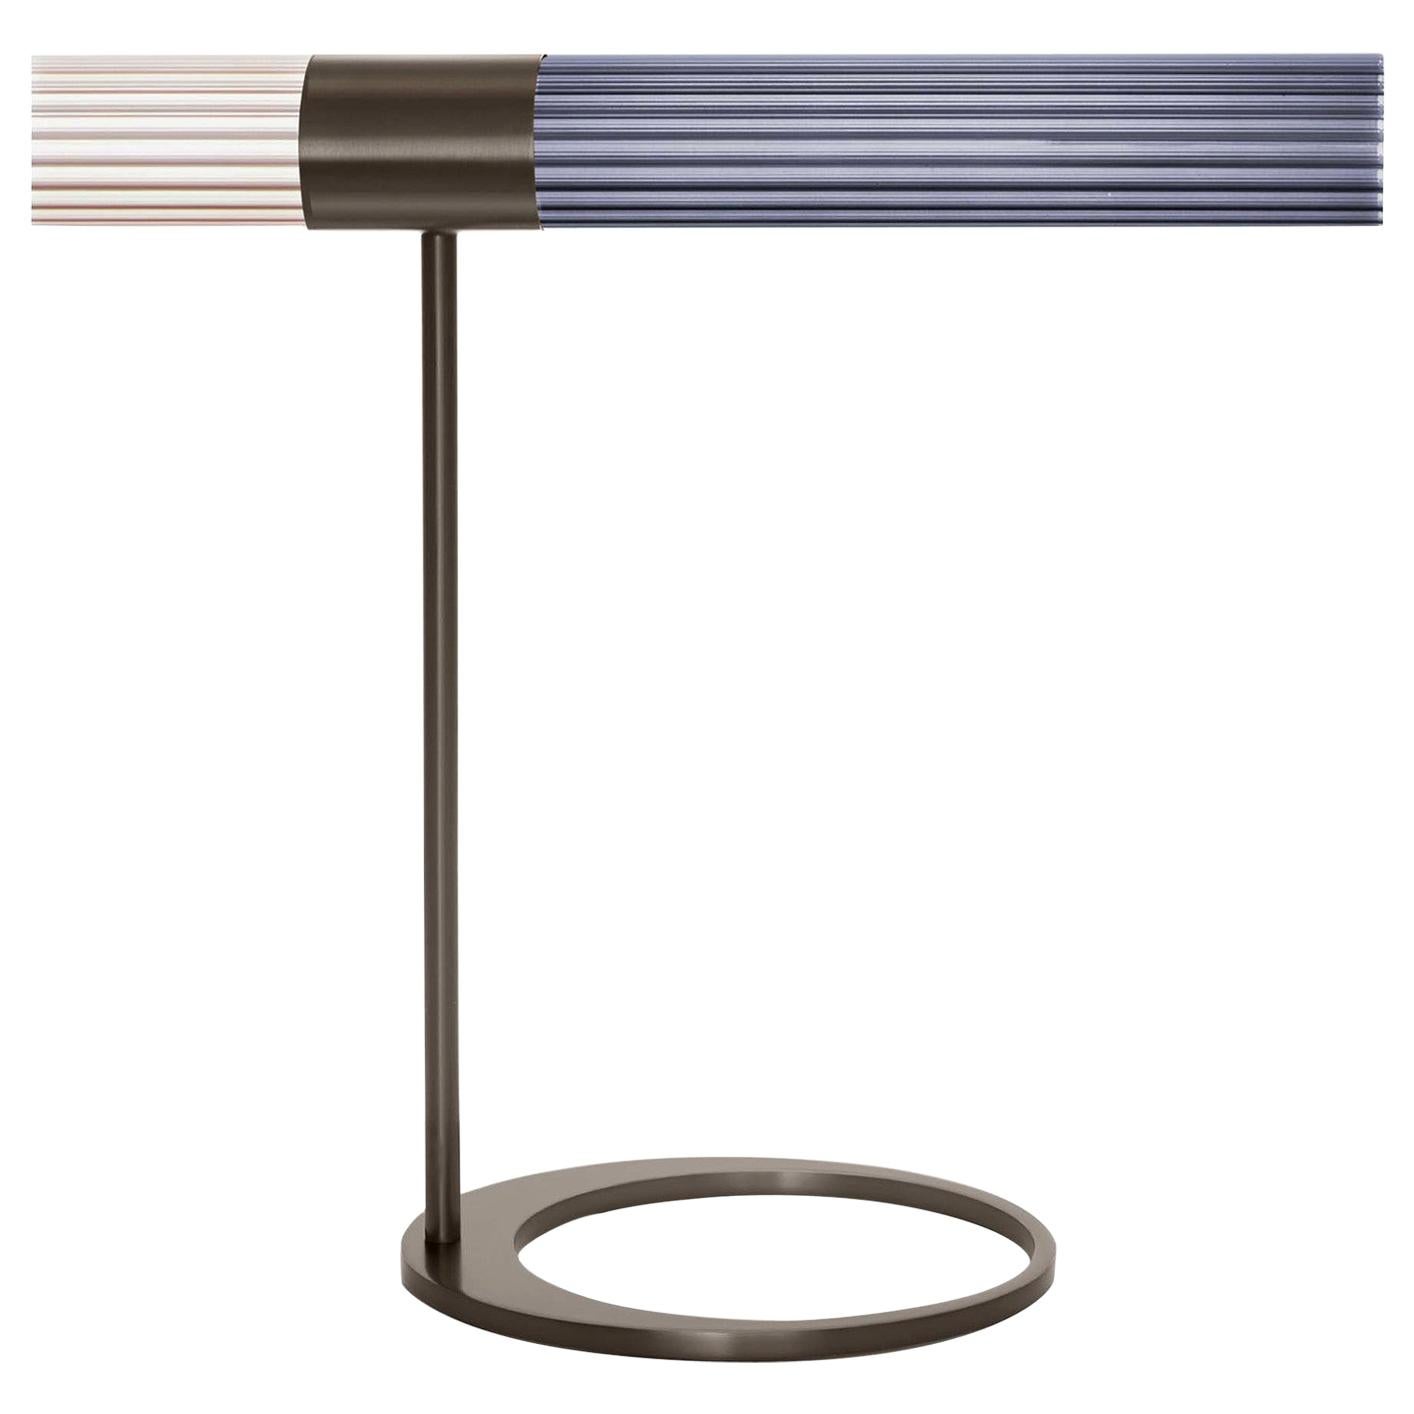 Sbarlusc Blue and White Table Lamp by Isacco Brioschi